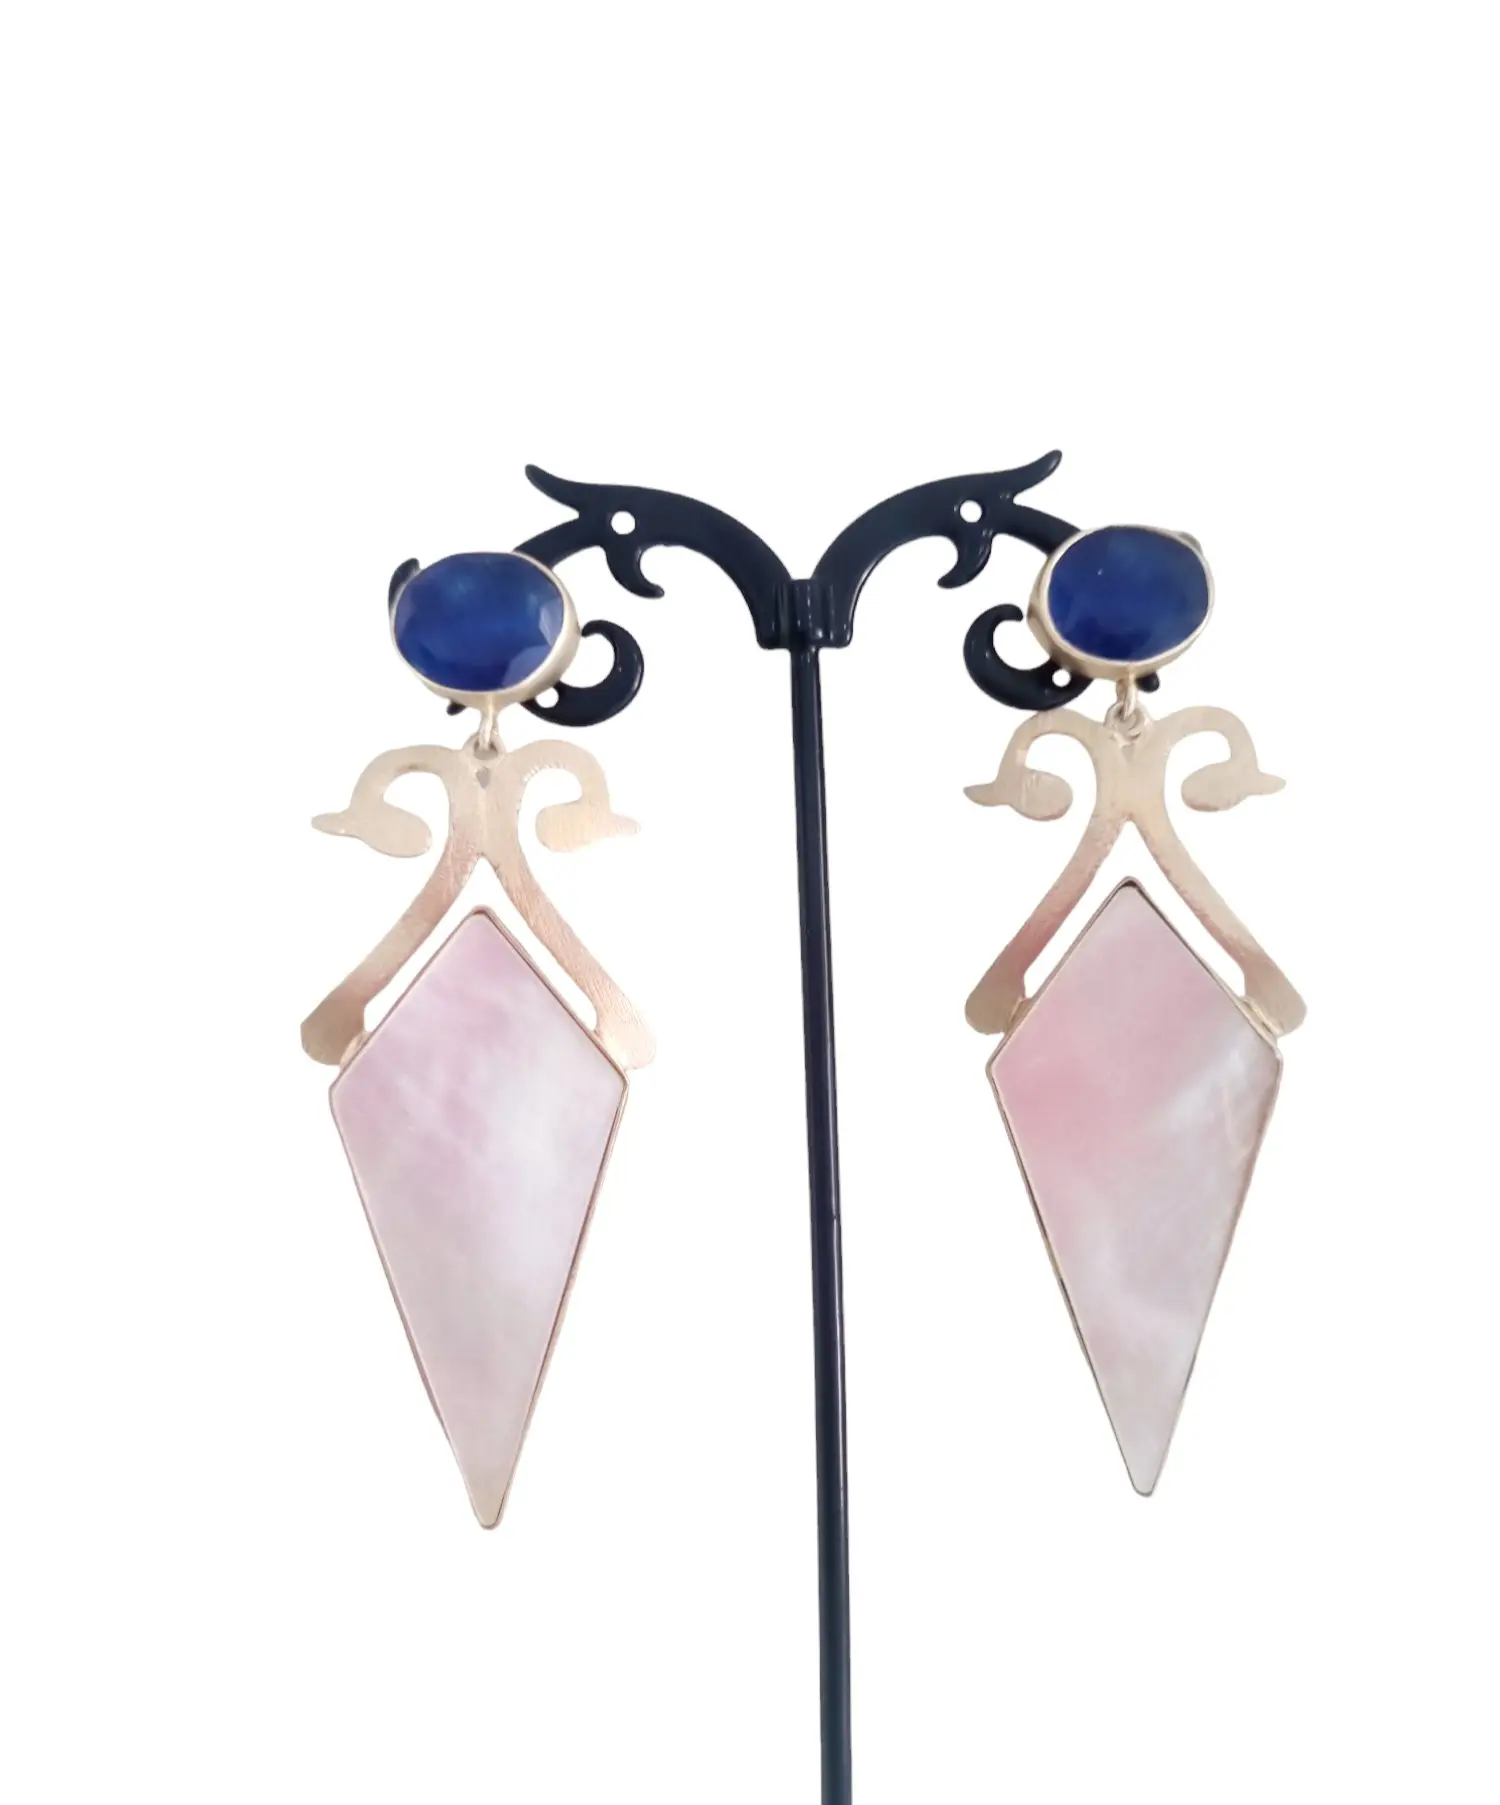 Earrings made with mother of pearl, blue cat's eye and brass work.Length 7.5cmWeight 11.8gr